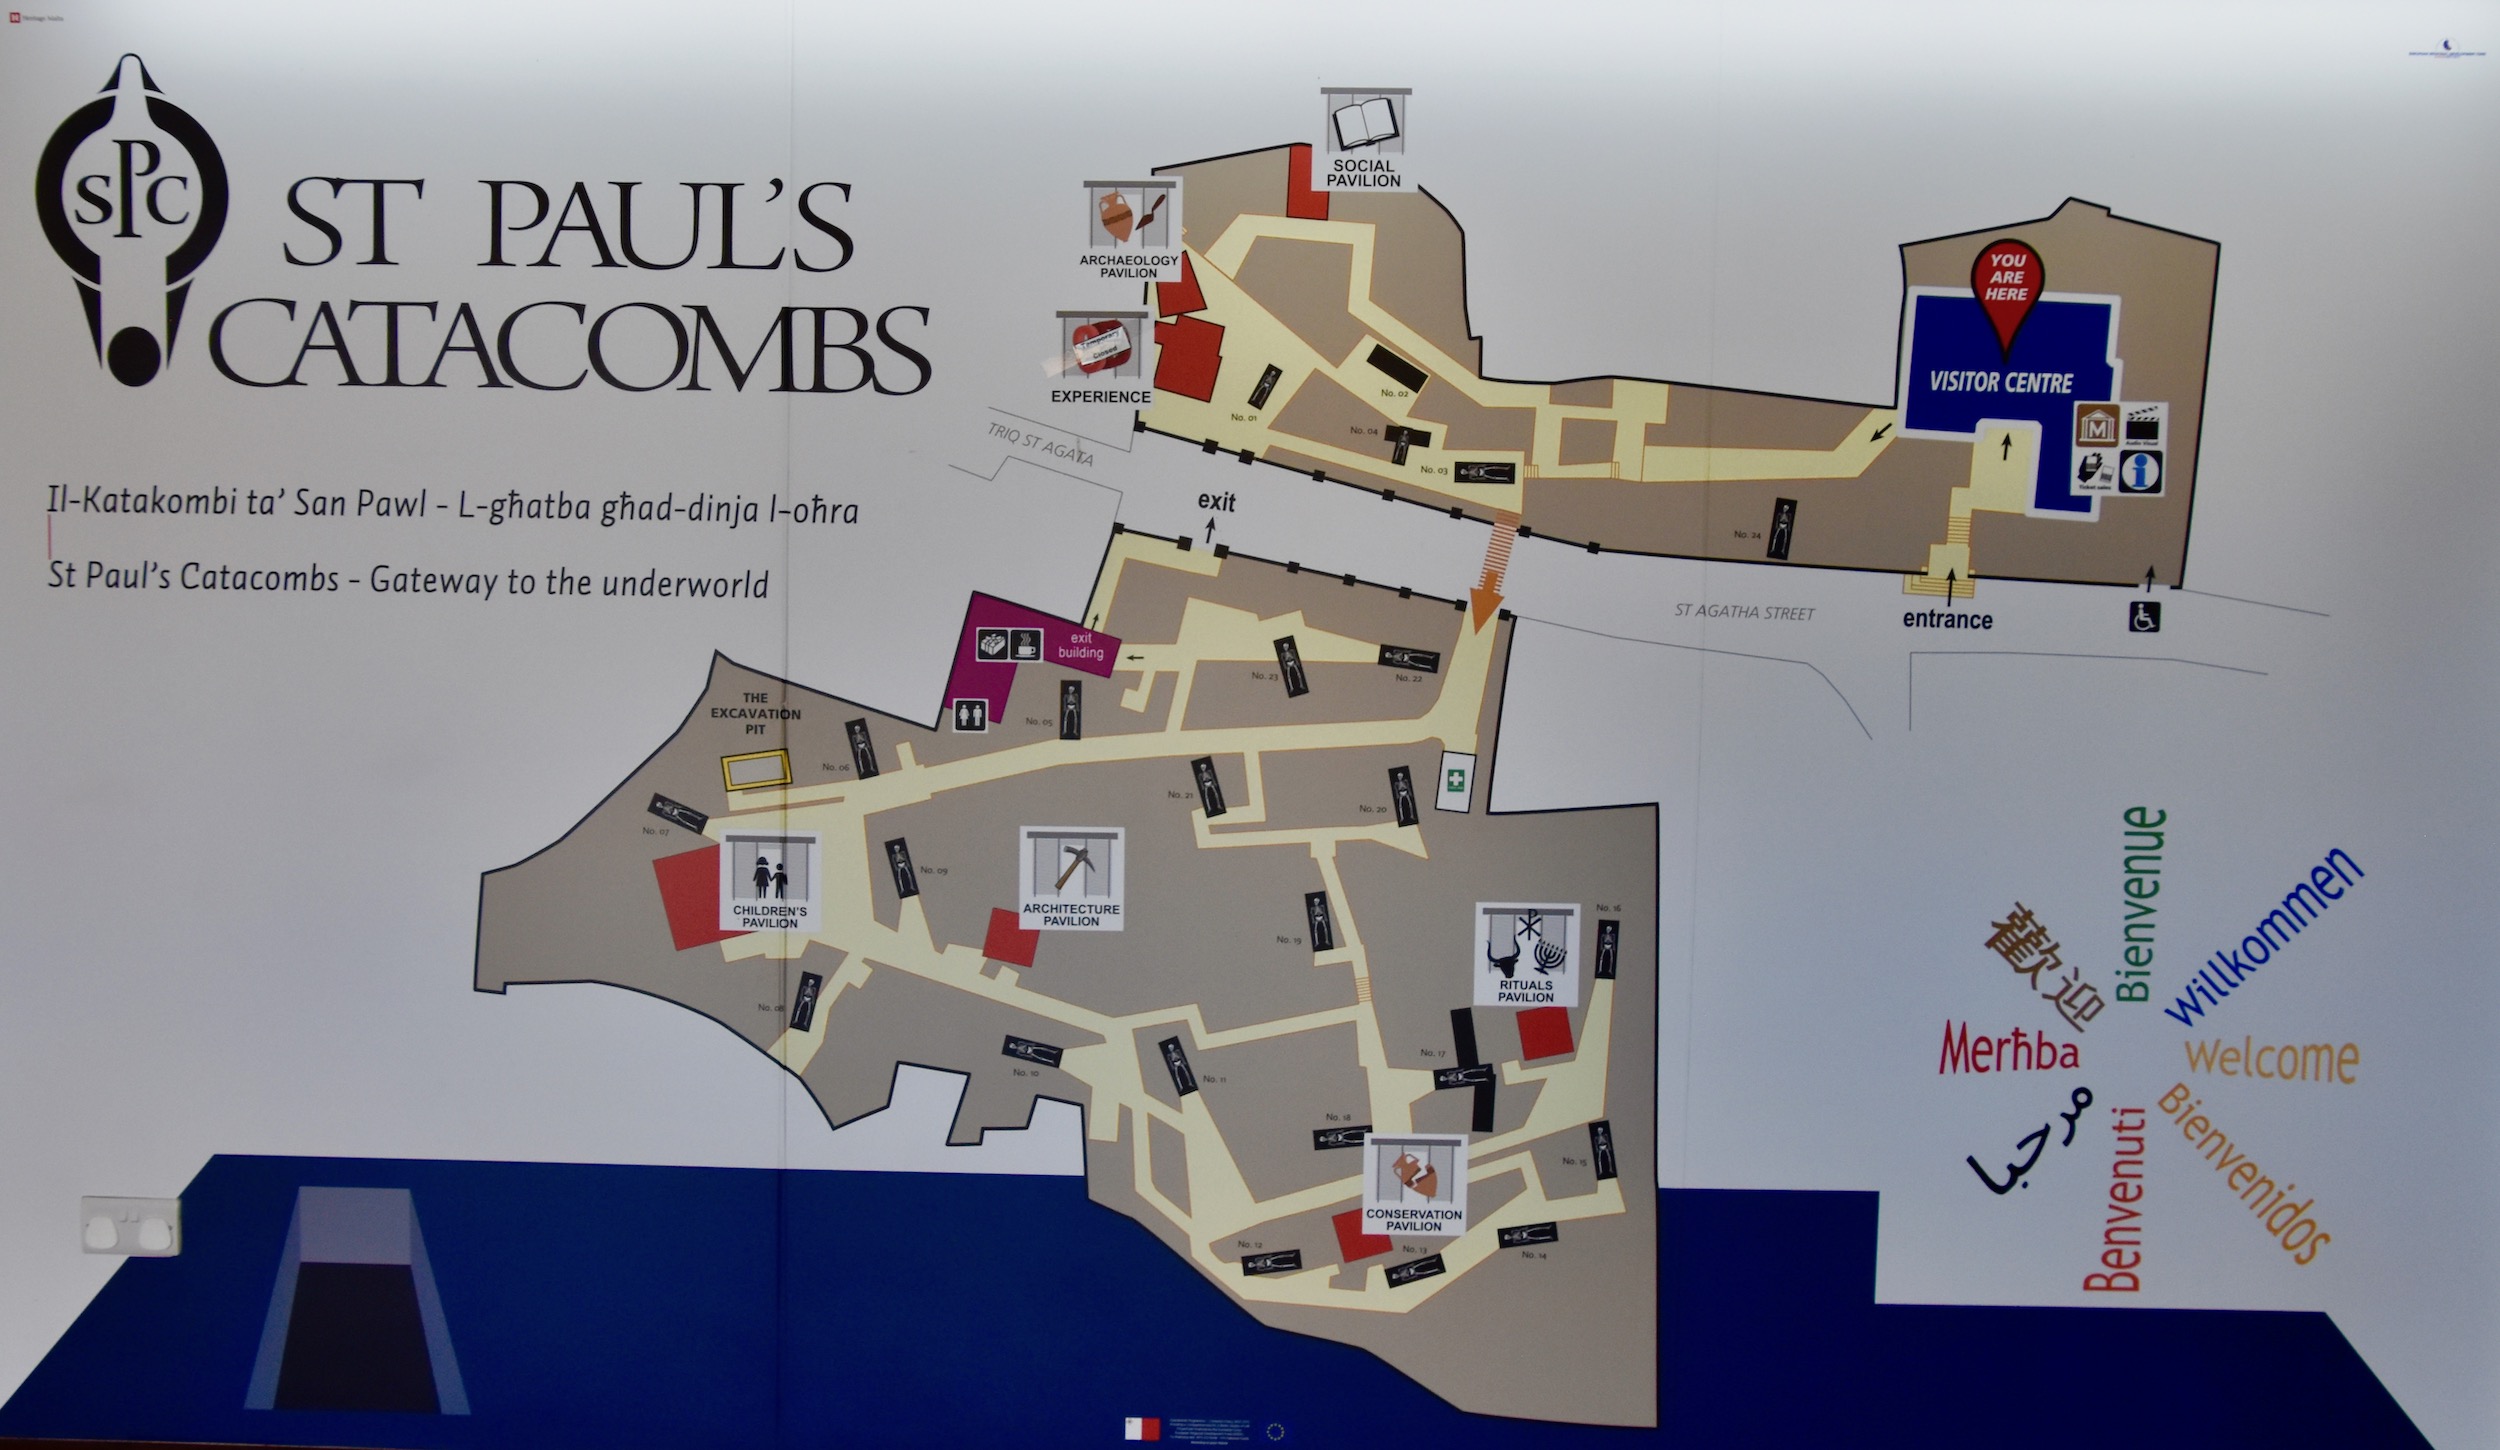 Map of the Catacombs of St. Paul in Malta